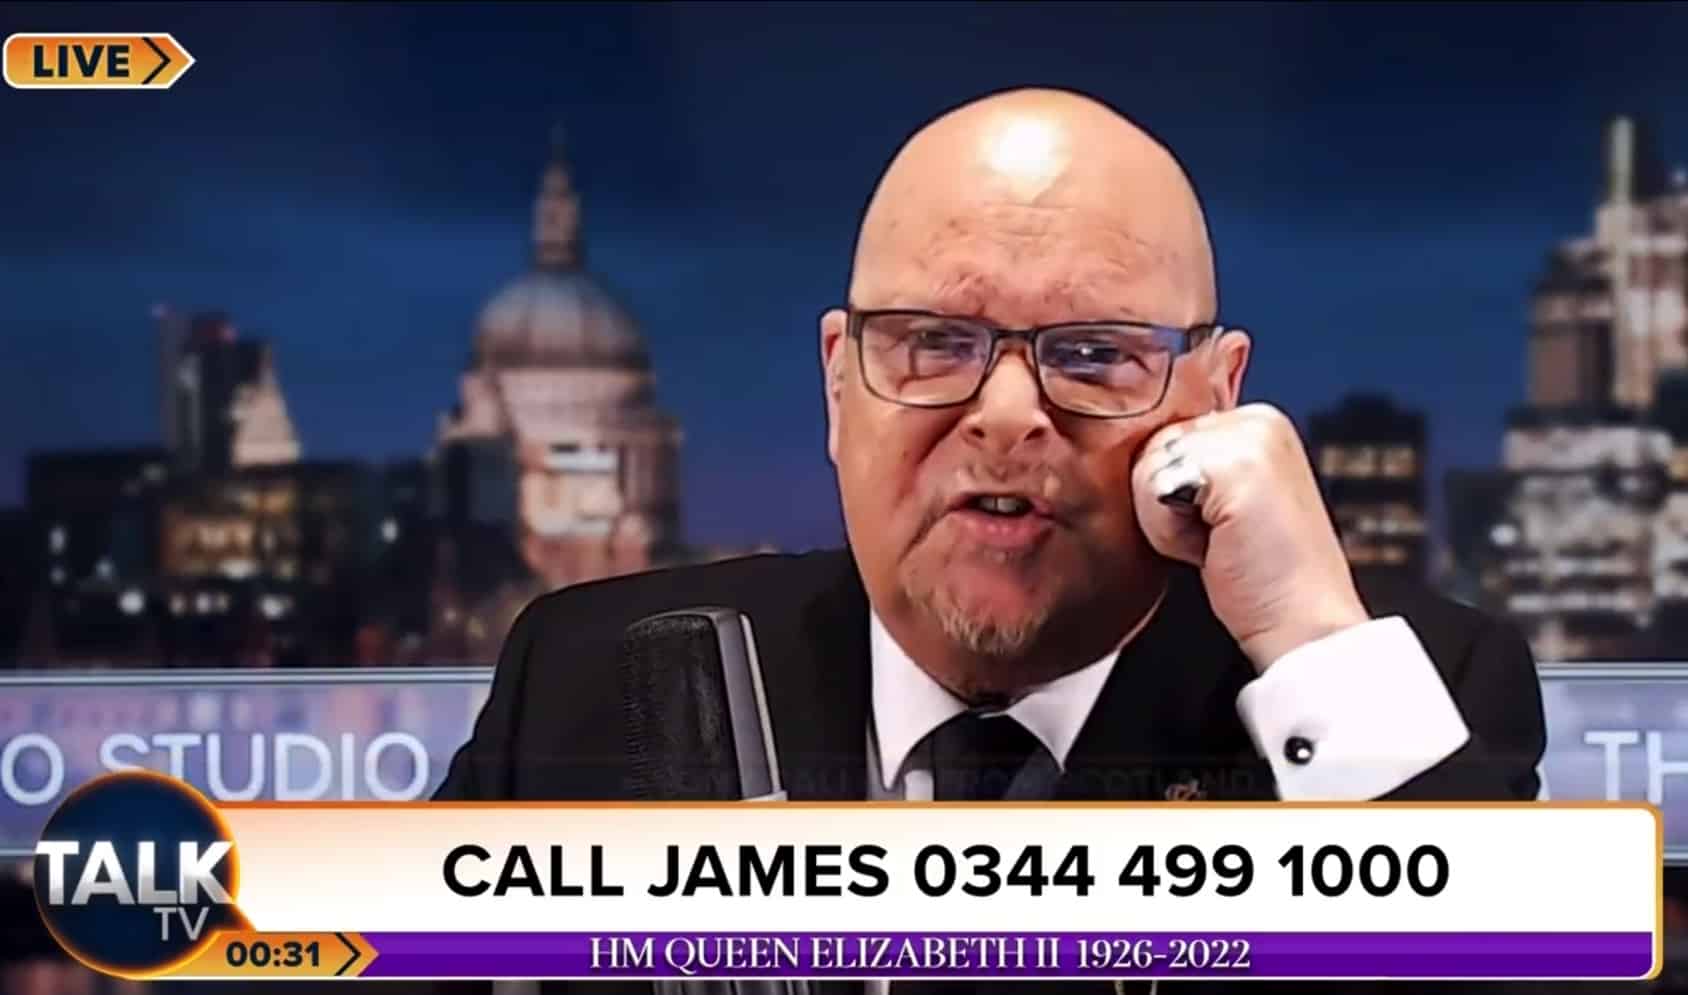 TalkTV host furious after caller asks him why he cares so much about the Queen dying